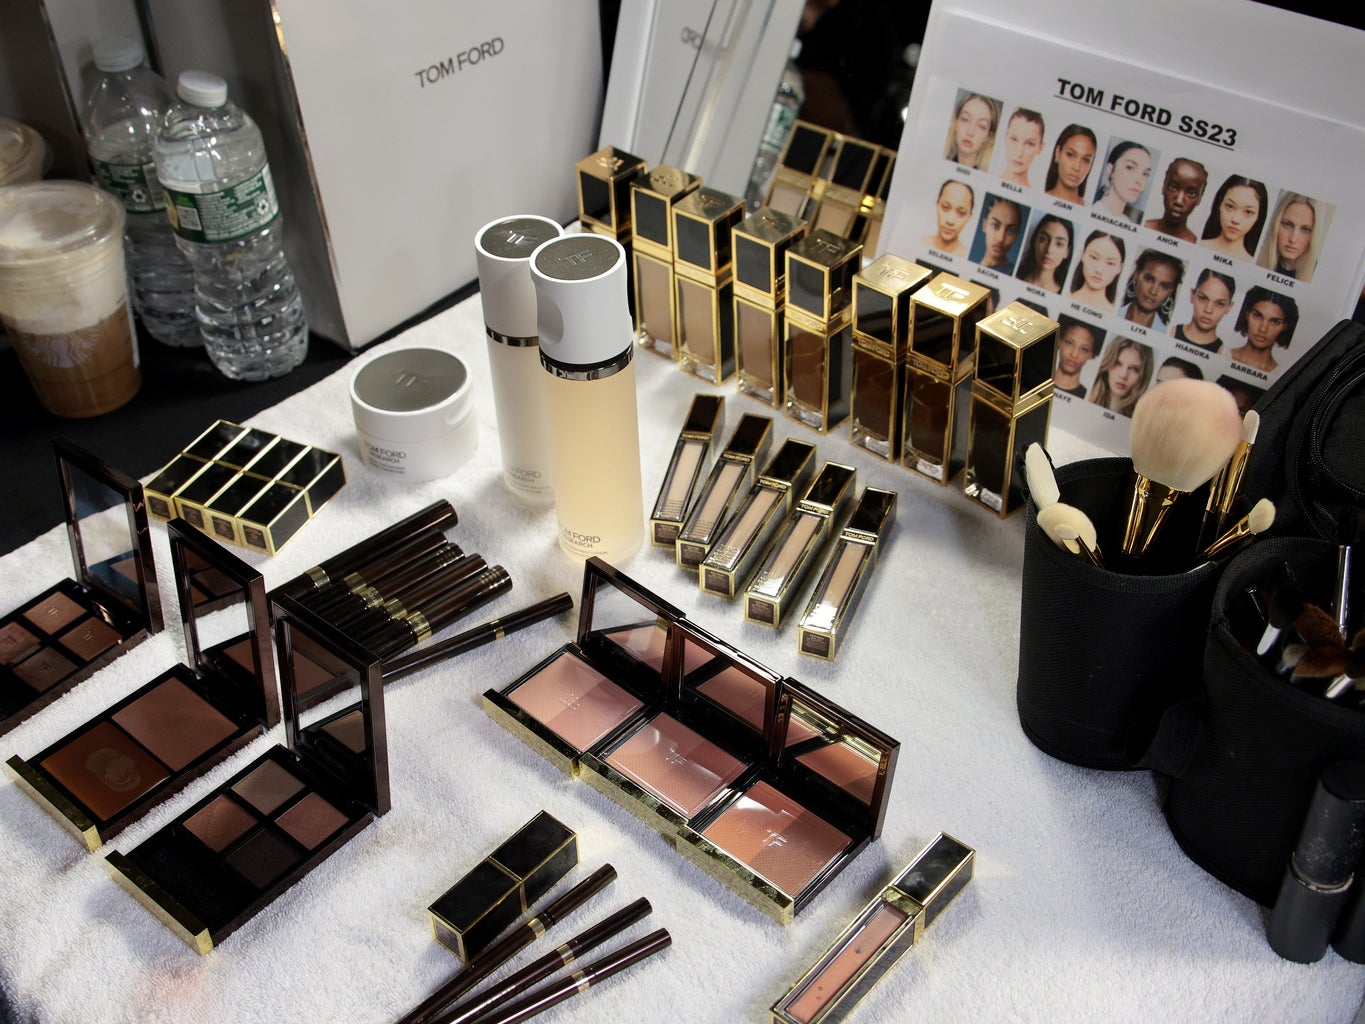 Estee Lauder agrees to acquire Tom Ford in $ deal (NYSE:EL) | Seeking  Alpha